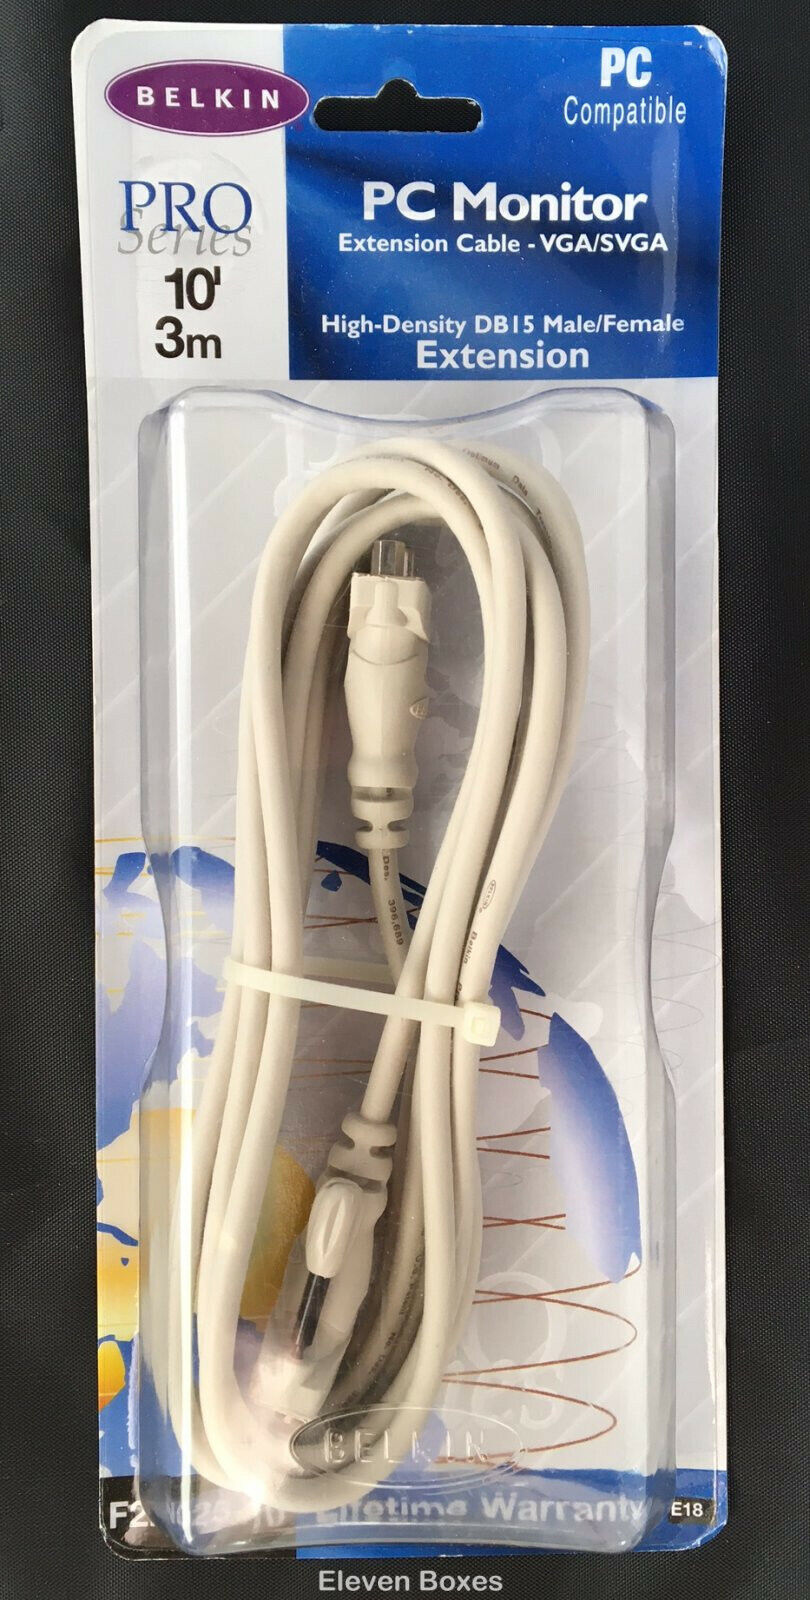 Belkin Pro Series 10' monitor extension cable for VGA/SVGA male/female DB15 ends